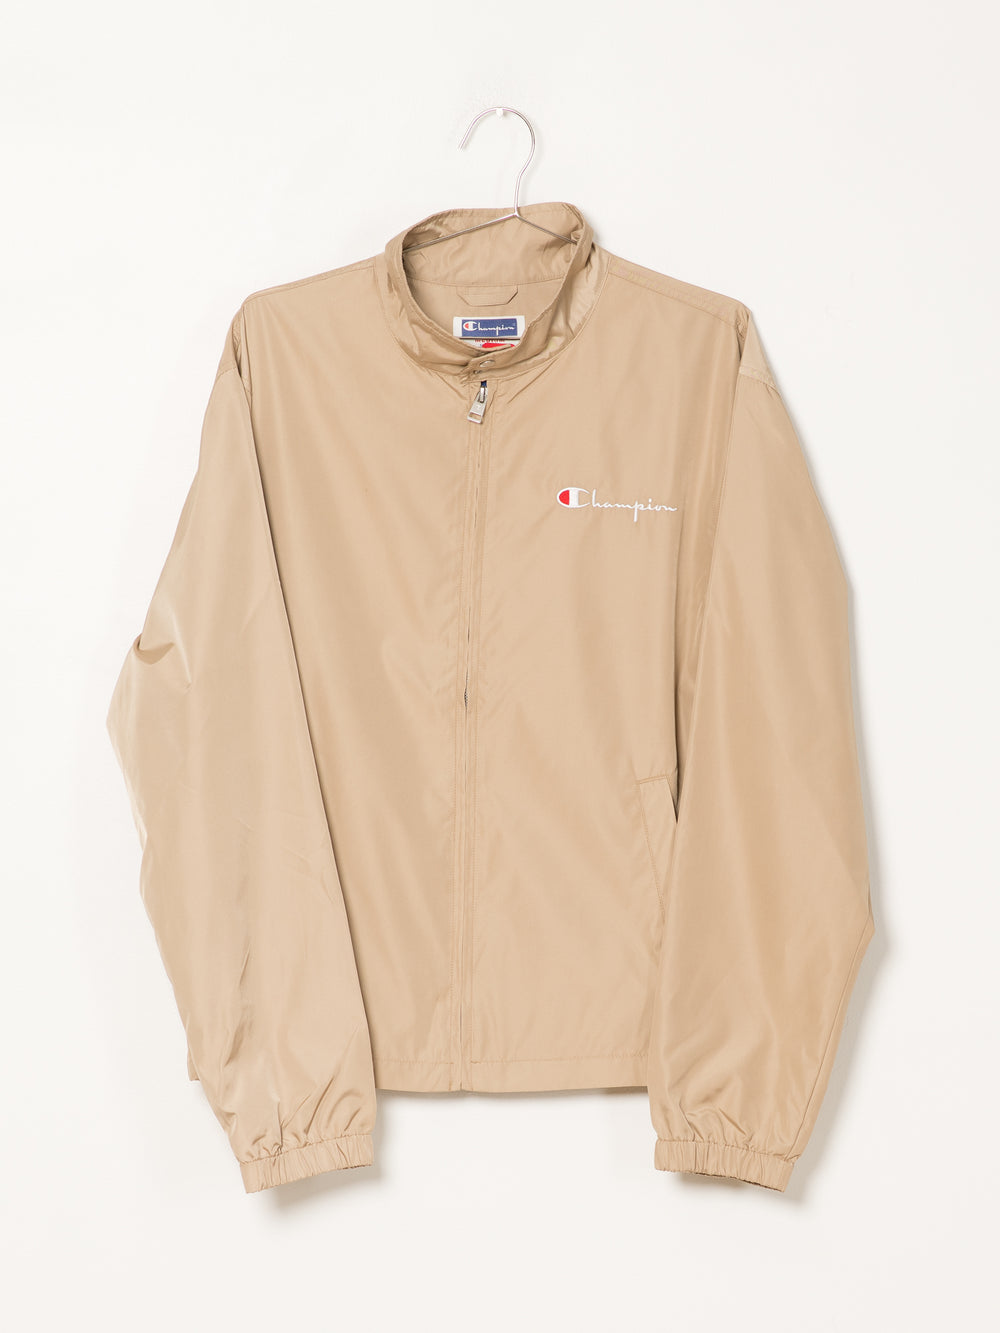 CHAMPION WOVEN RALLY JACKET  - CLEARANCE